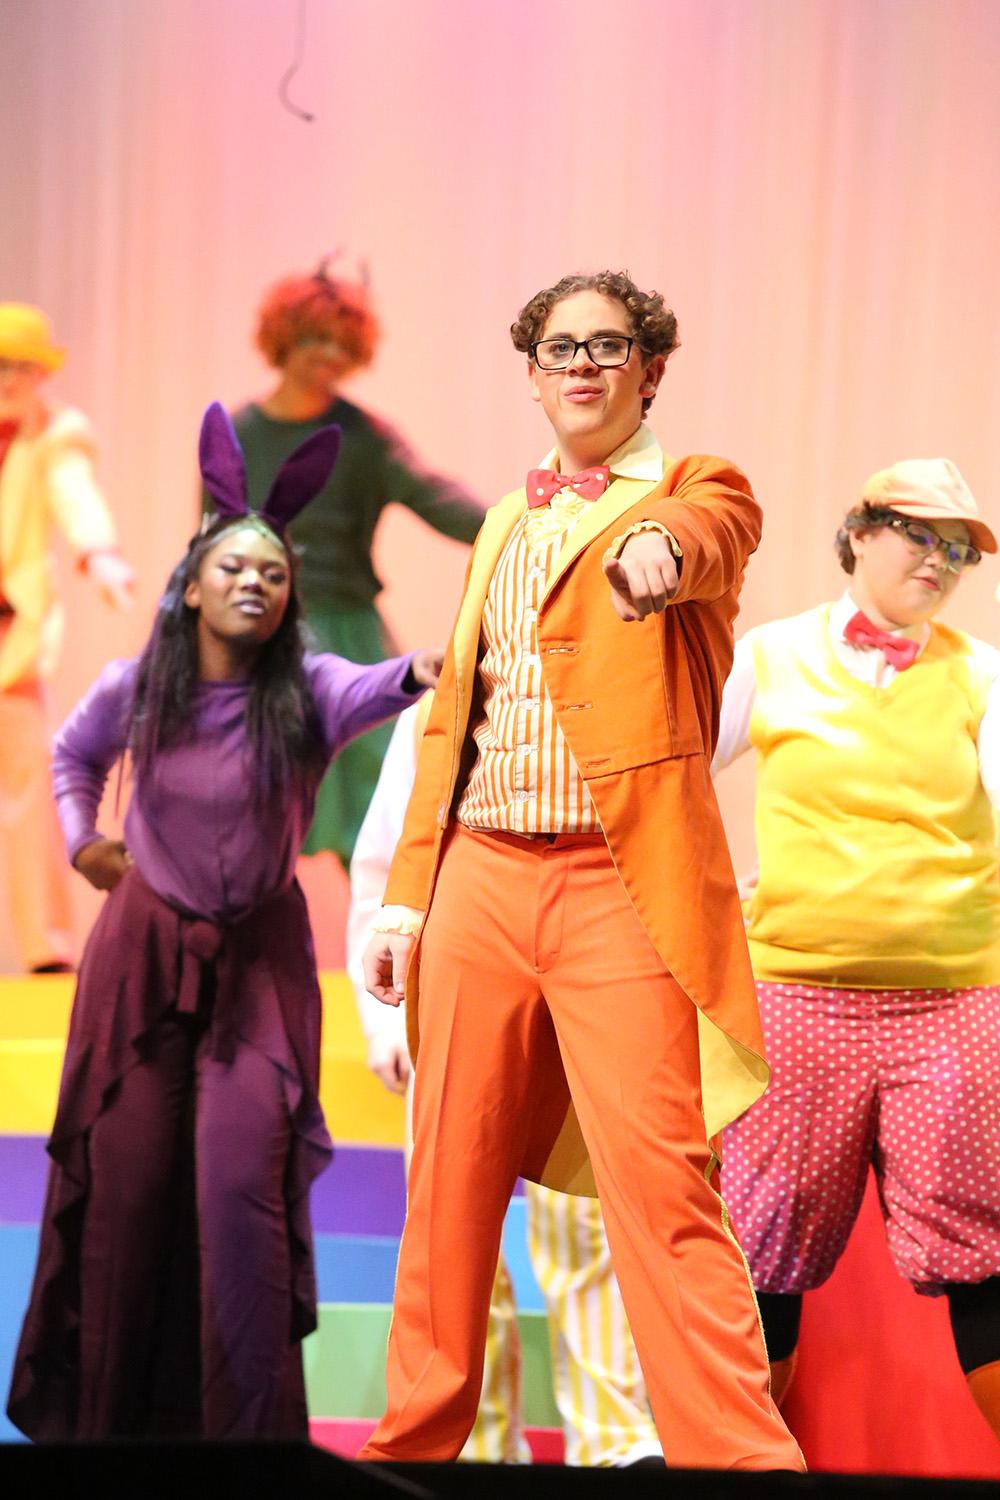 All+the+things+you+can+see+in+the+Seussical